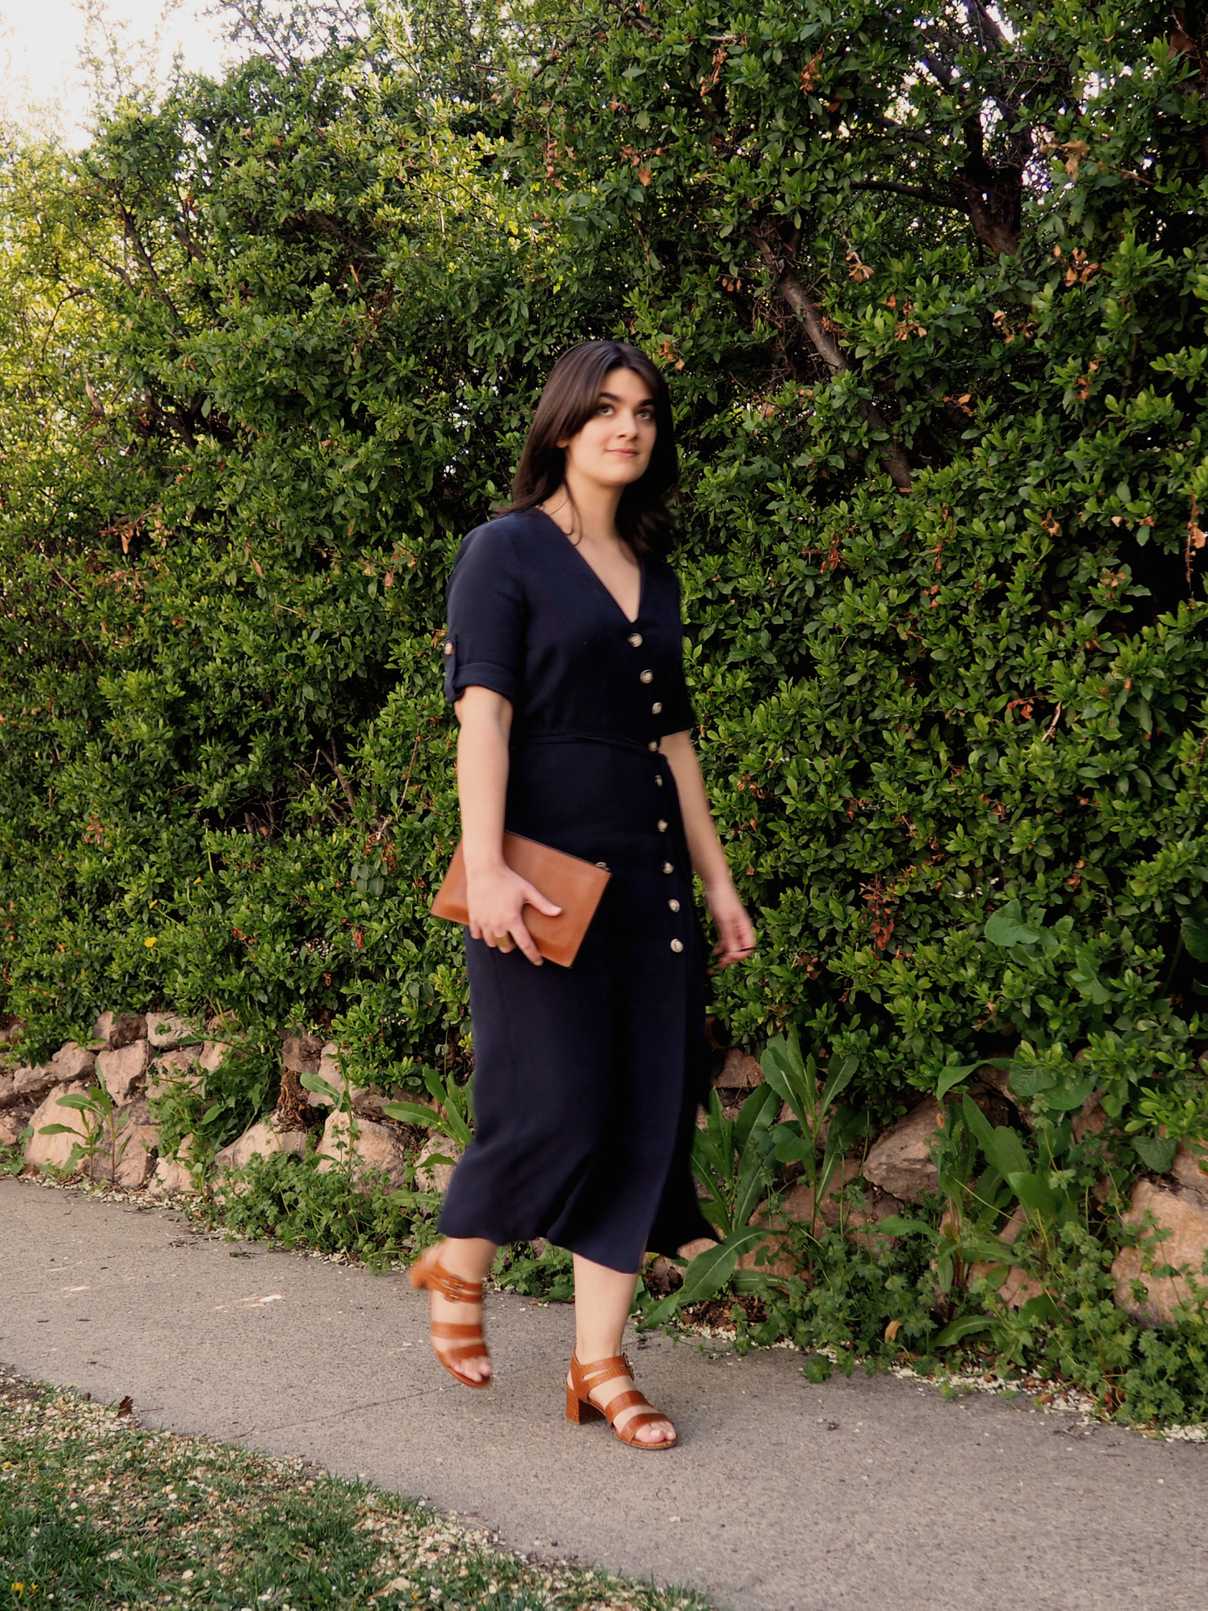 Sara wearing navy blue midi dress with tortoise shell buttons down front